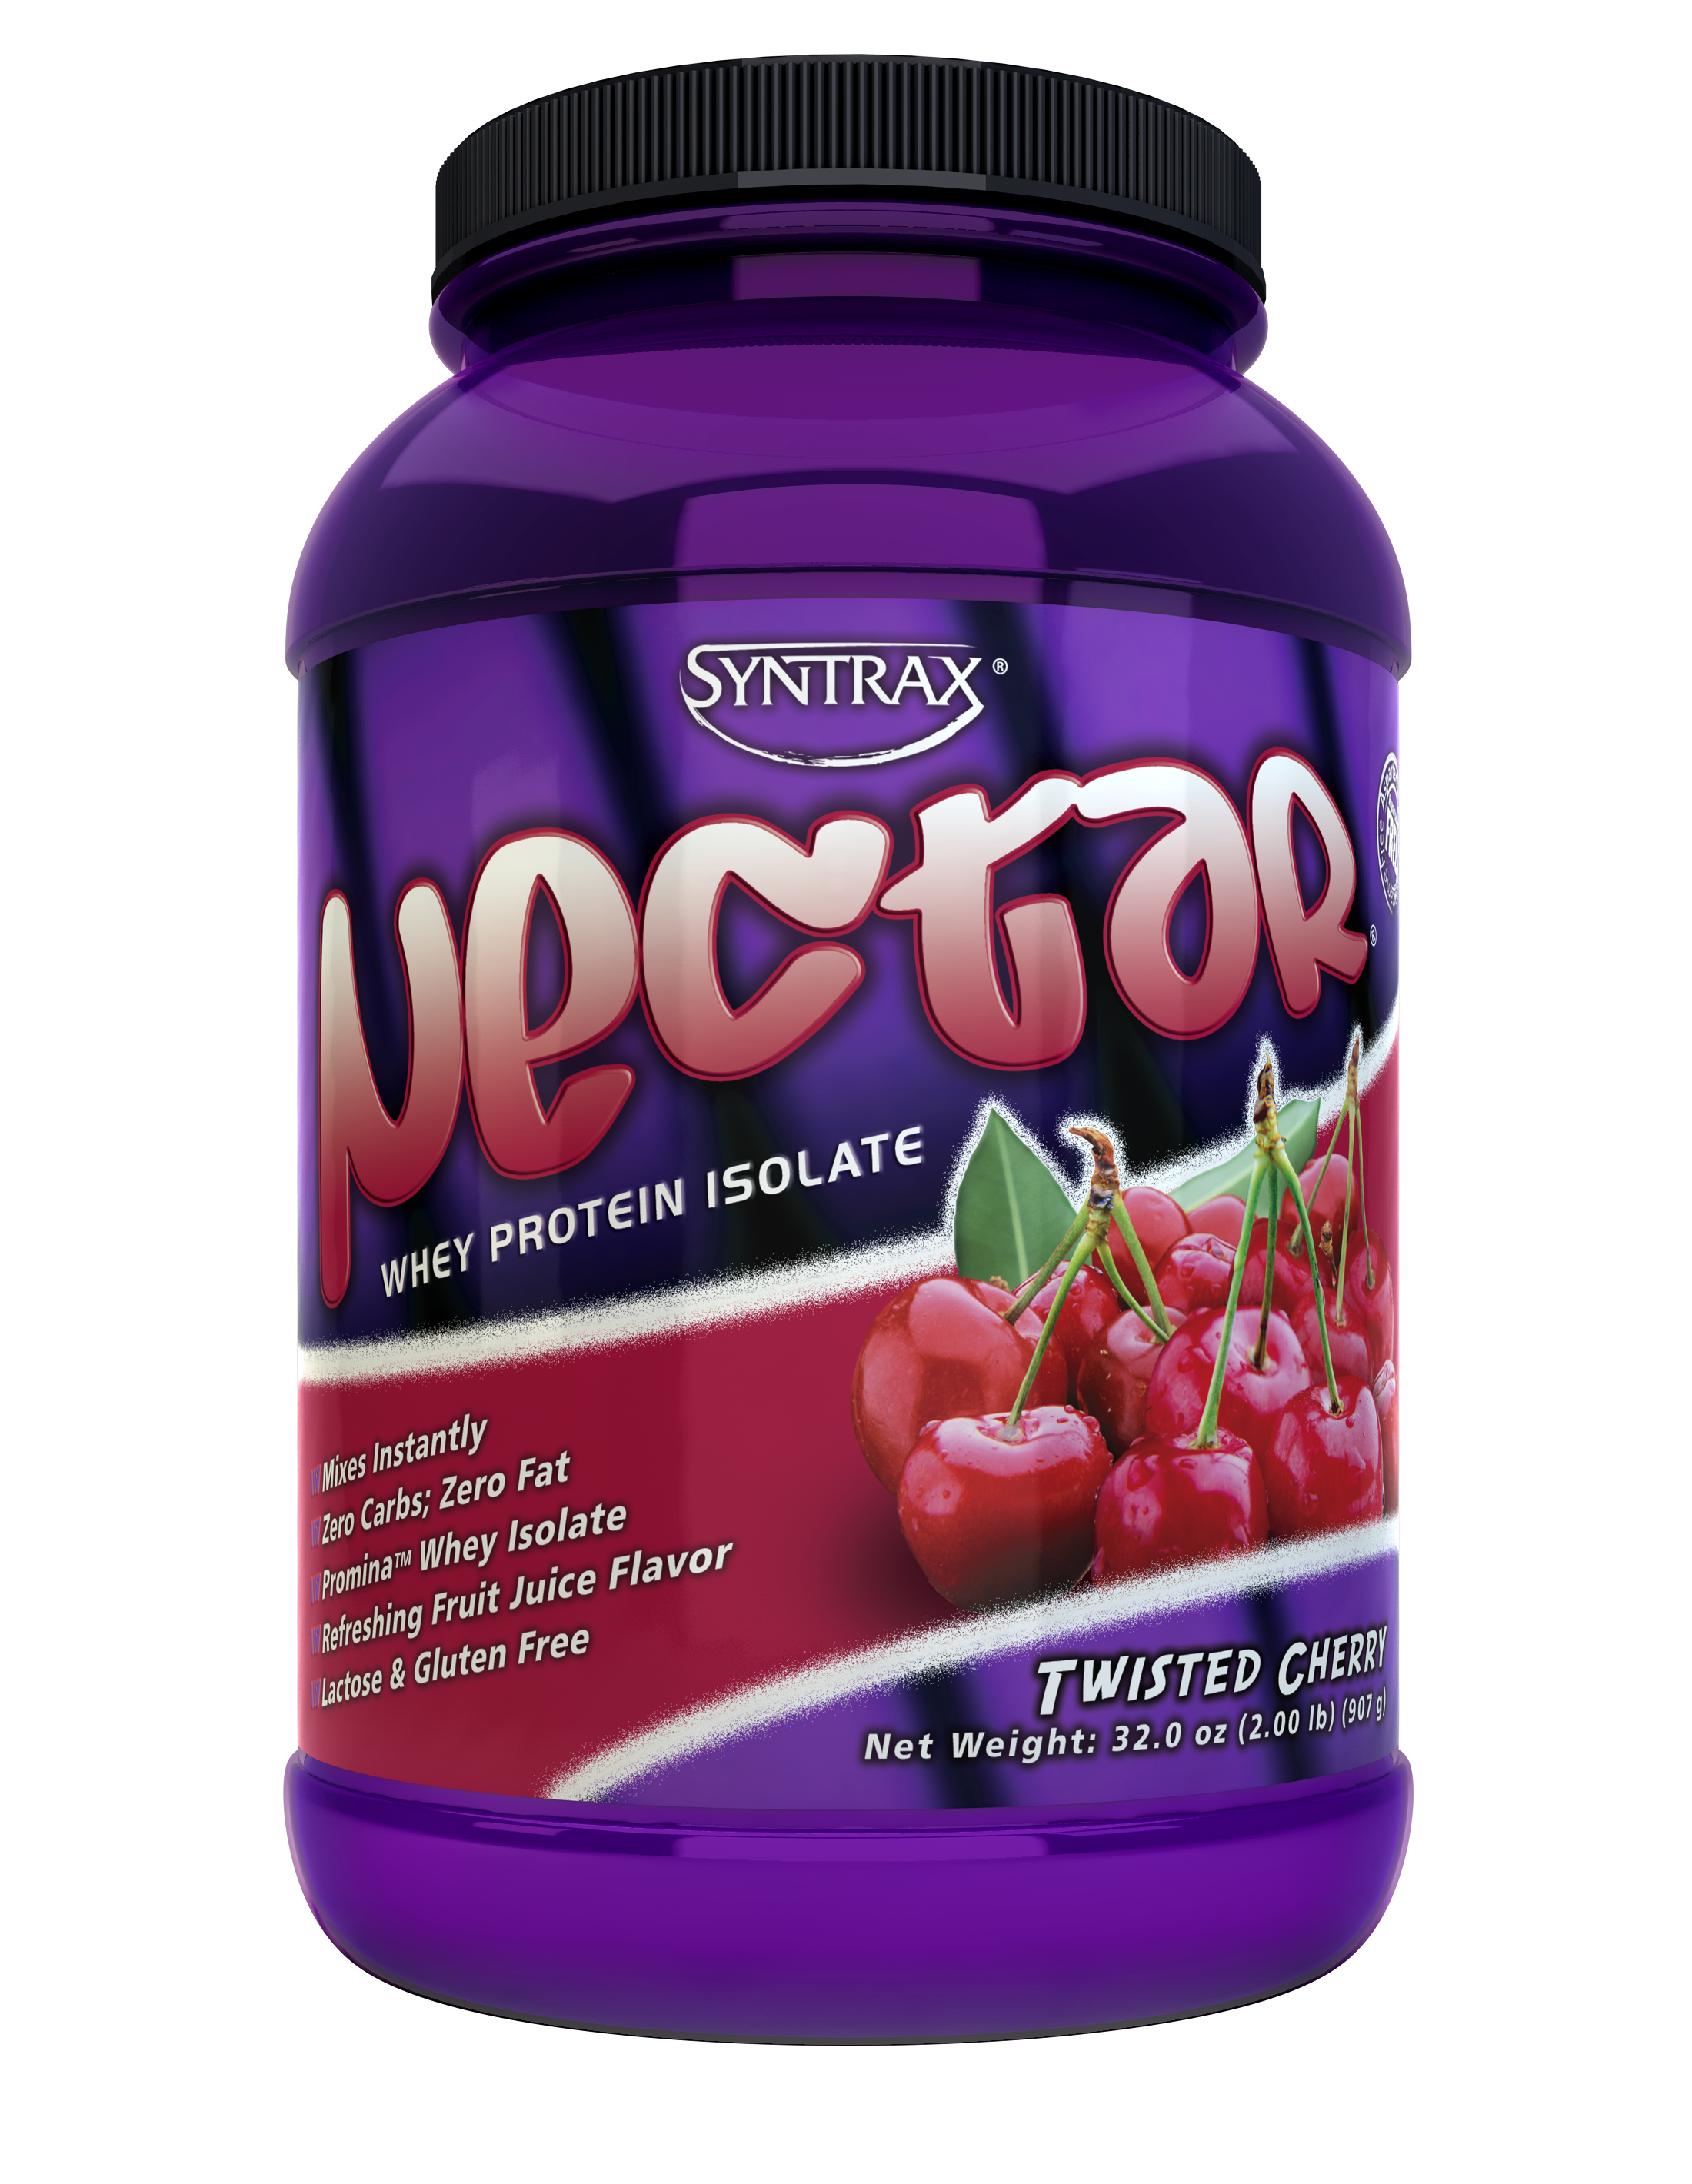 Syntrax Nectar - Twisted Cherry 2 lb